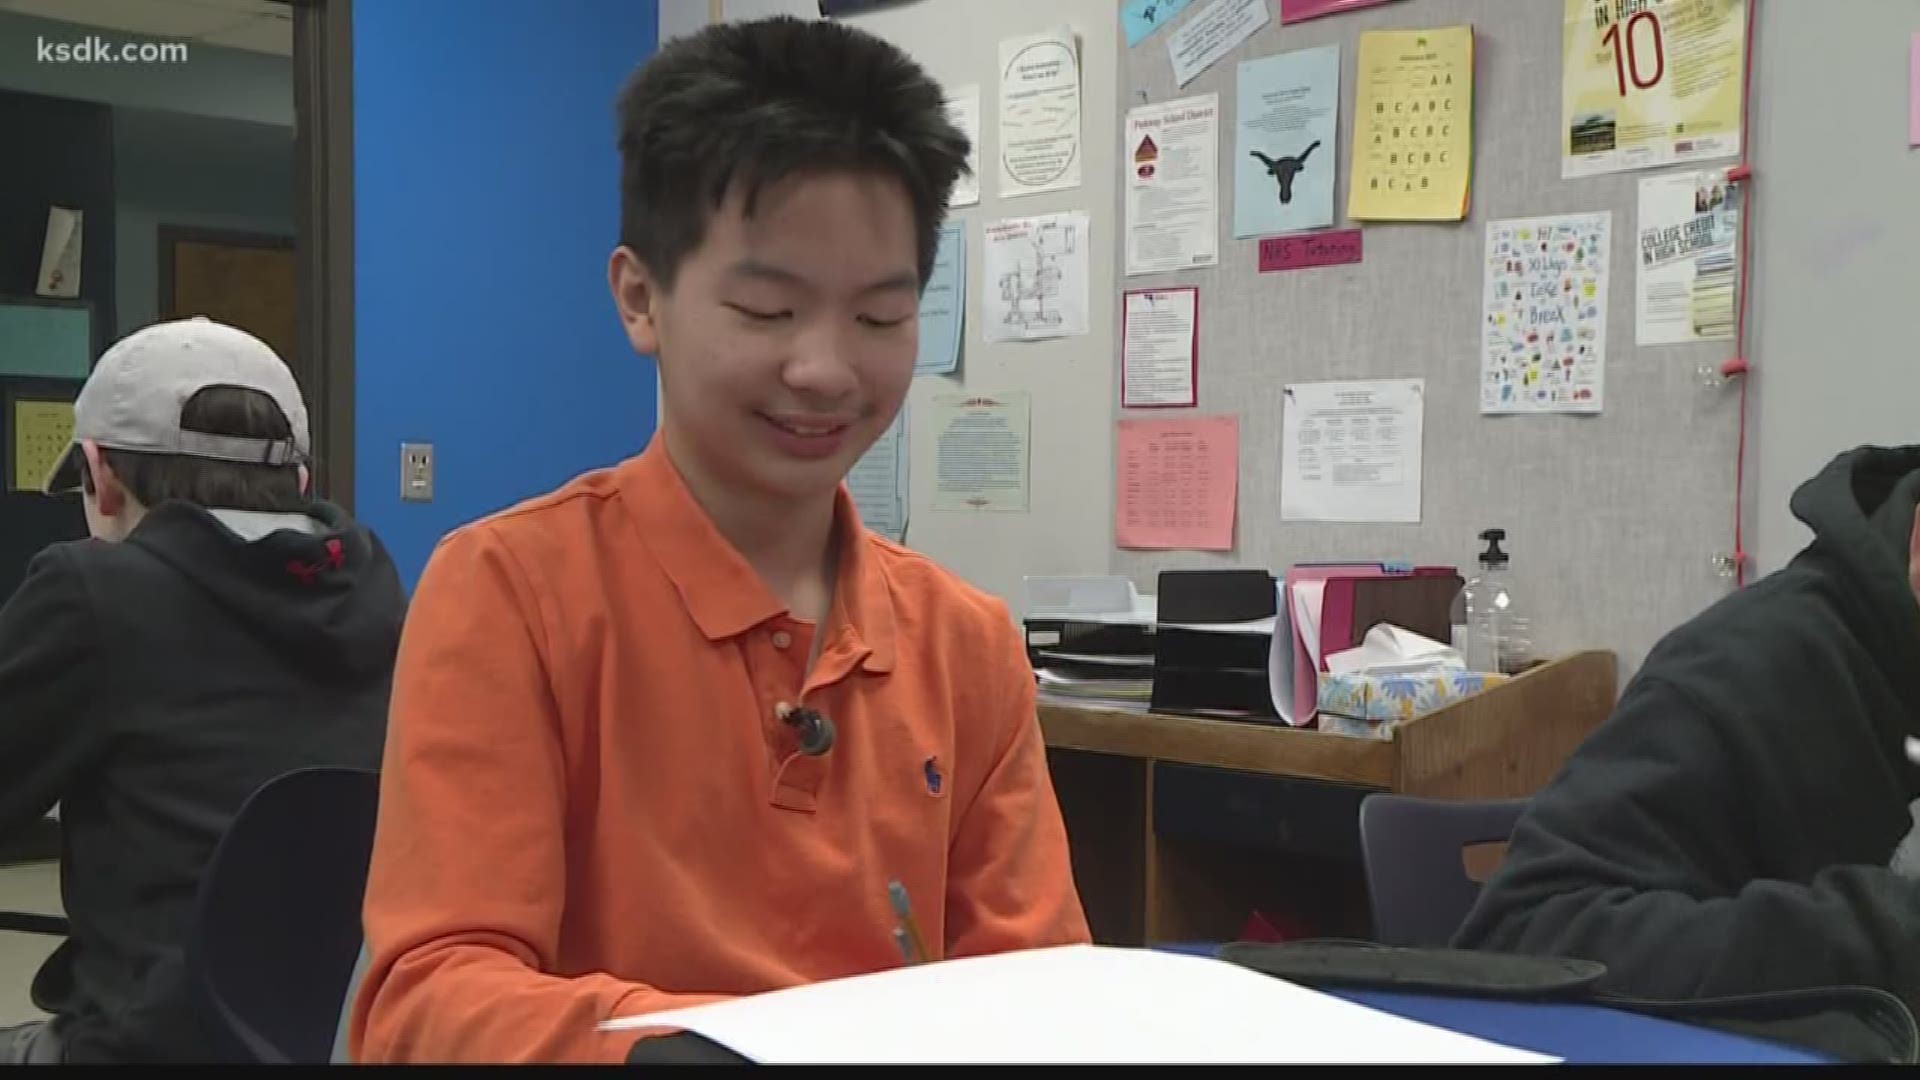 Even though he's not in high school yet, Wilson Gao has already posted a perfect 36 on the ACT.